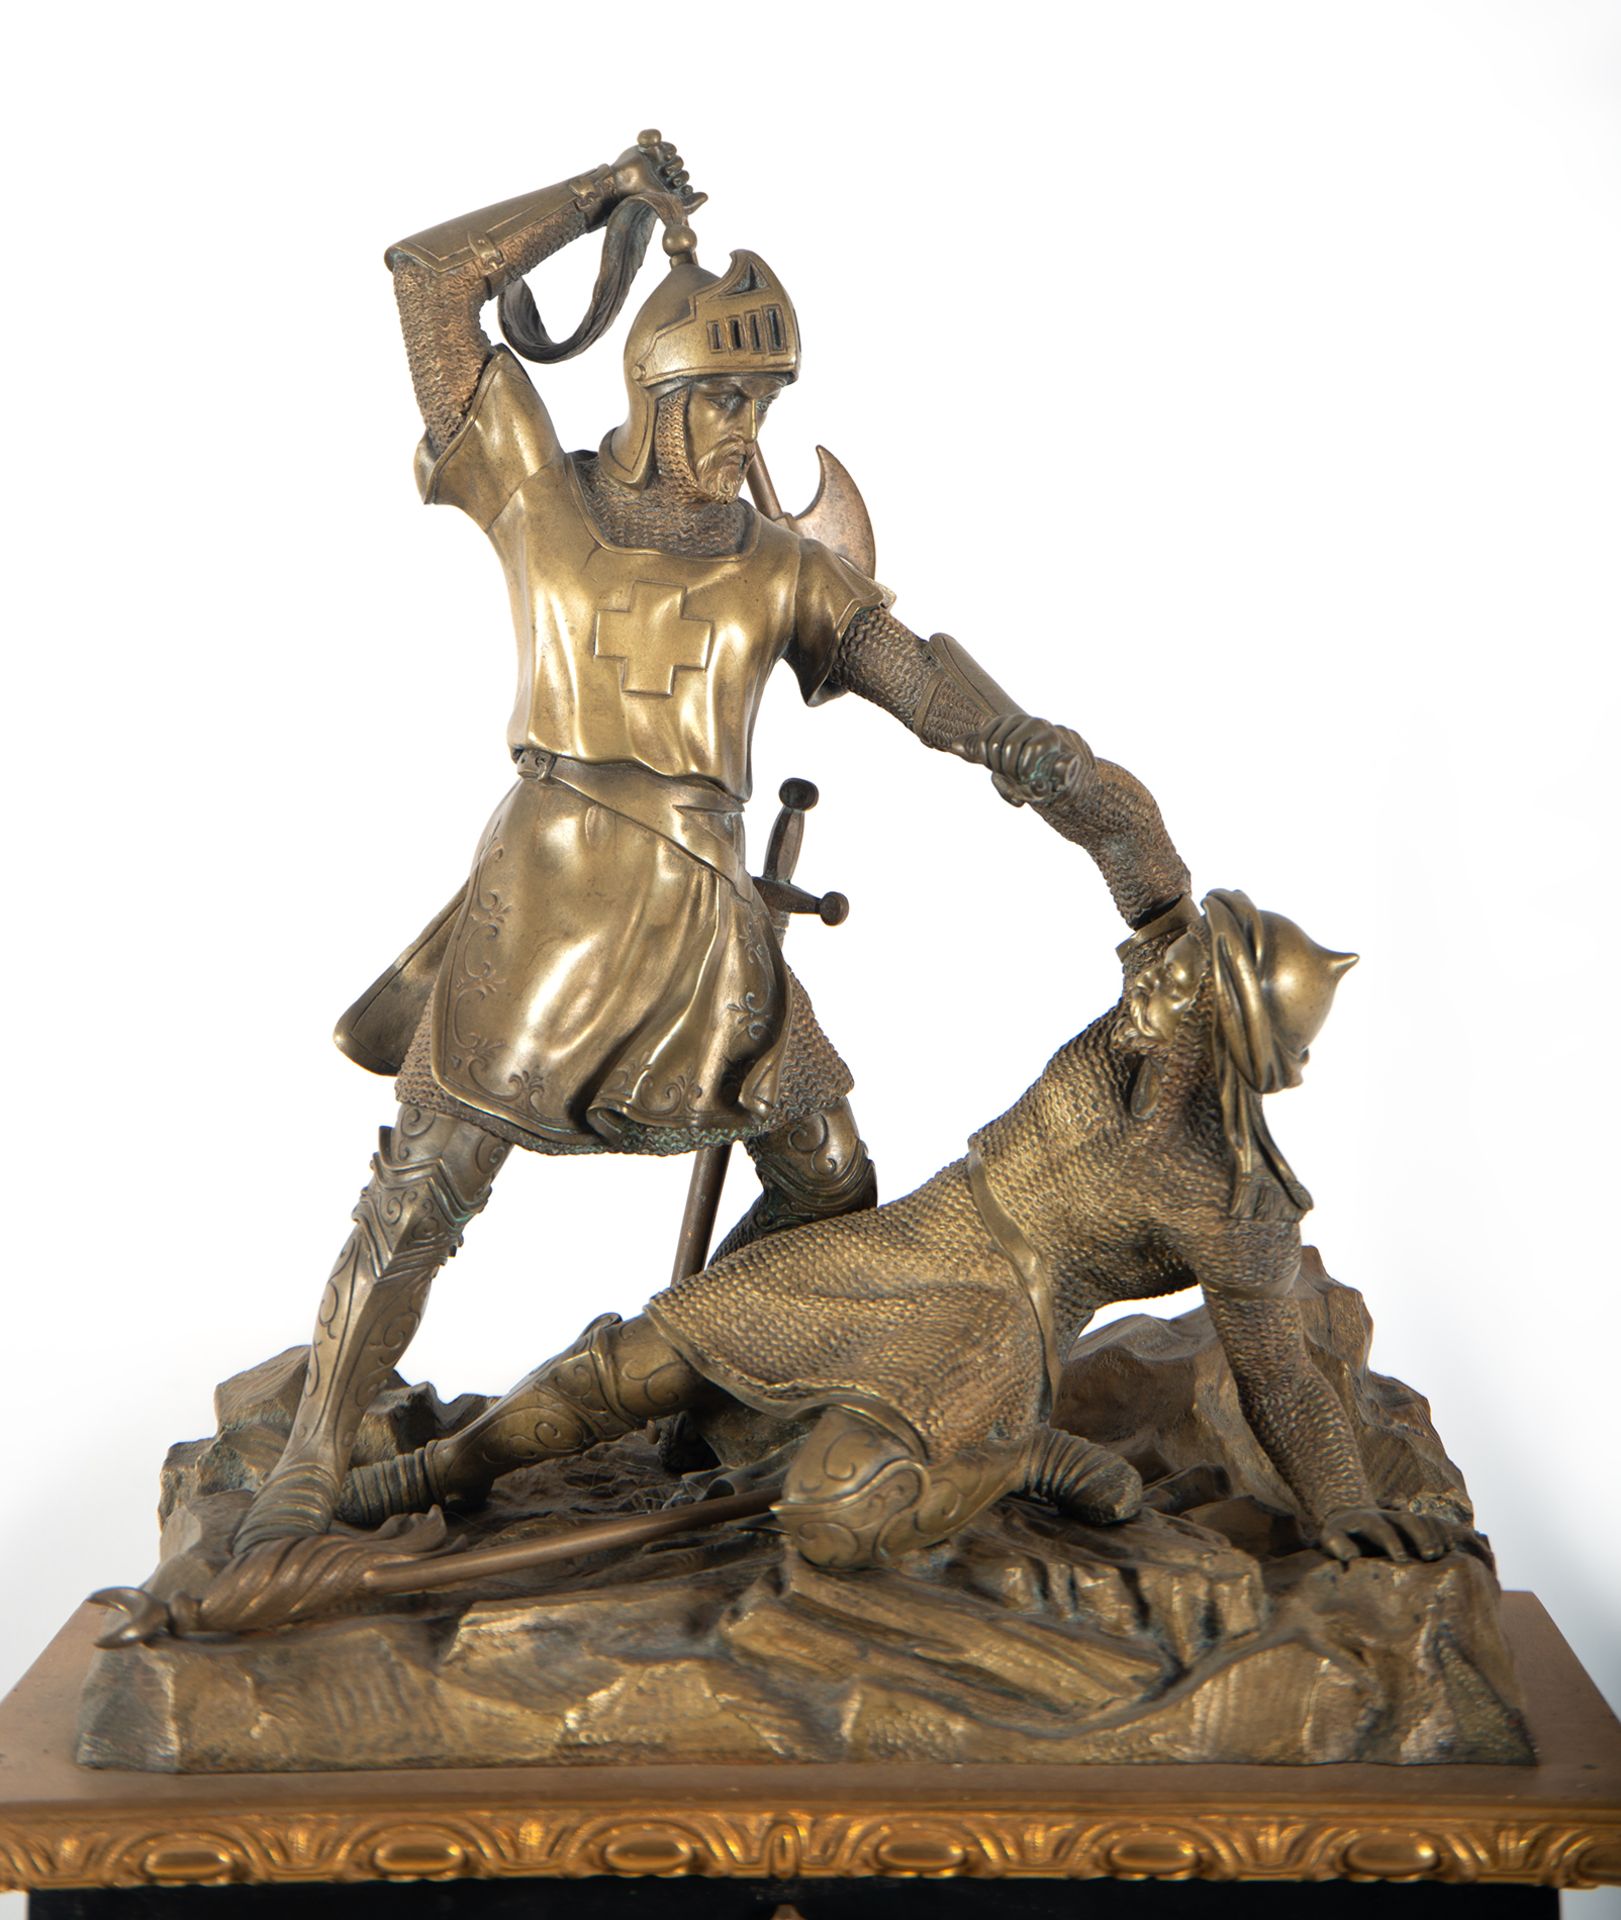 Gilt bronze clock depicting a Templar knight in the crusades, 19th century - Image 3 of 7